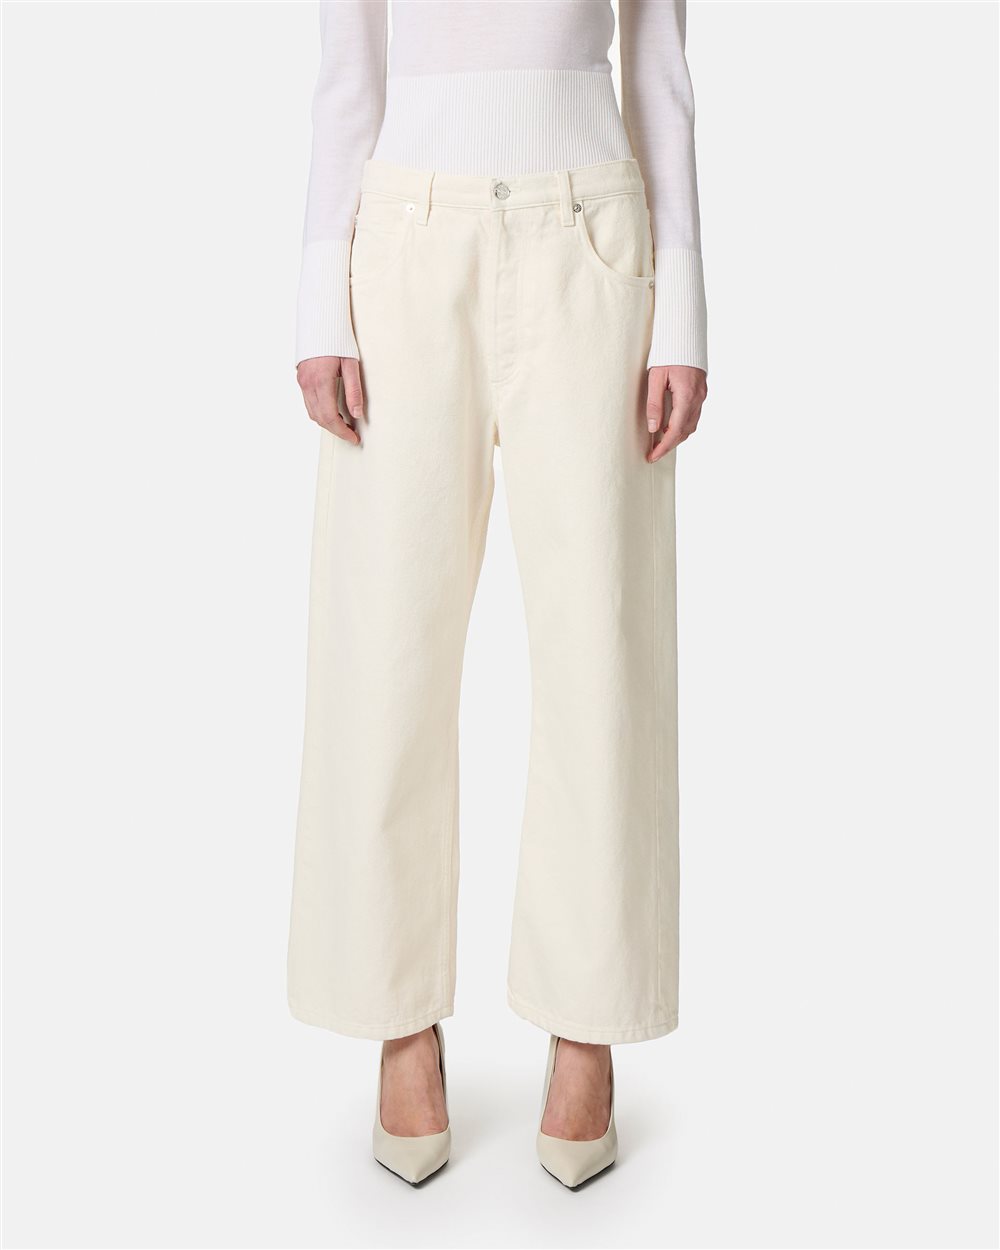 Ivory white jeans with logo - Iceberg - Official Website